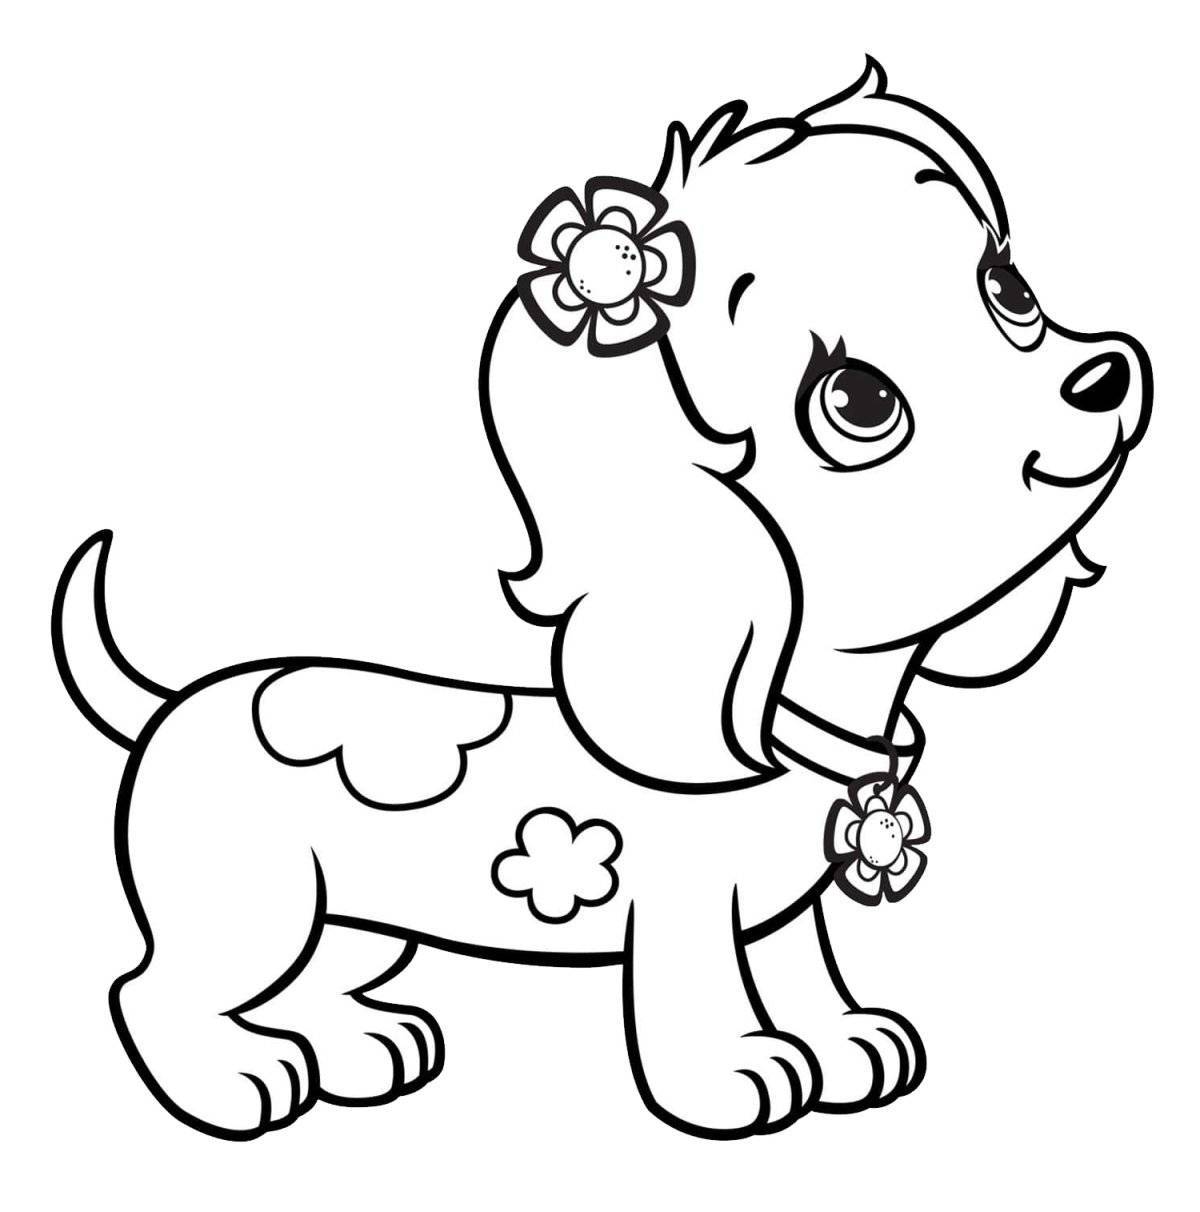 Coloring book inquisitive dog